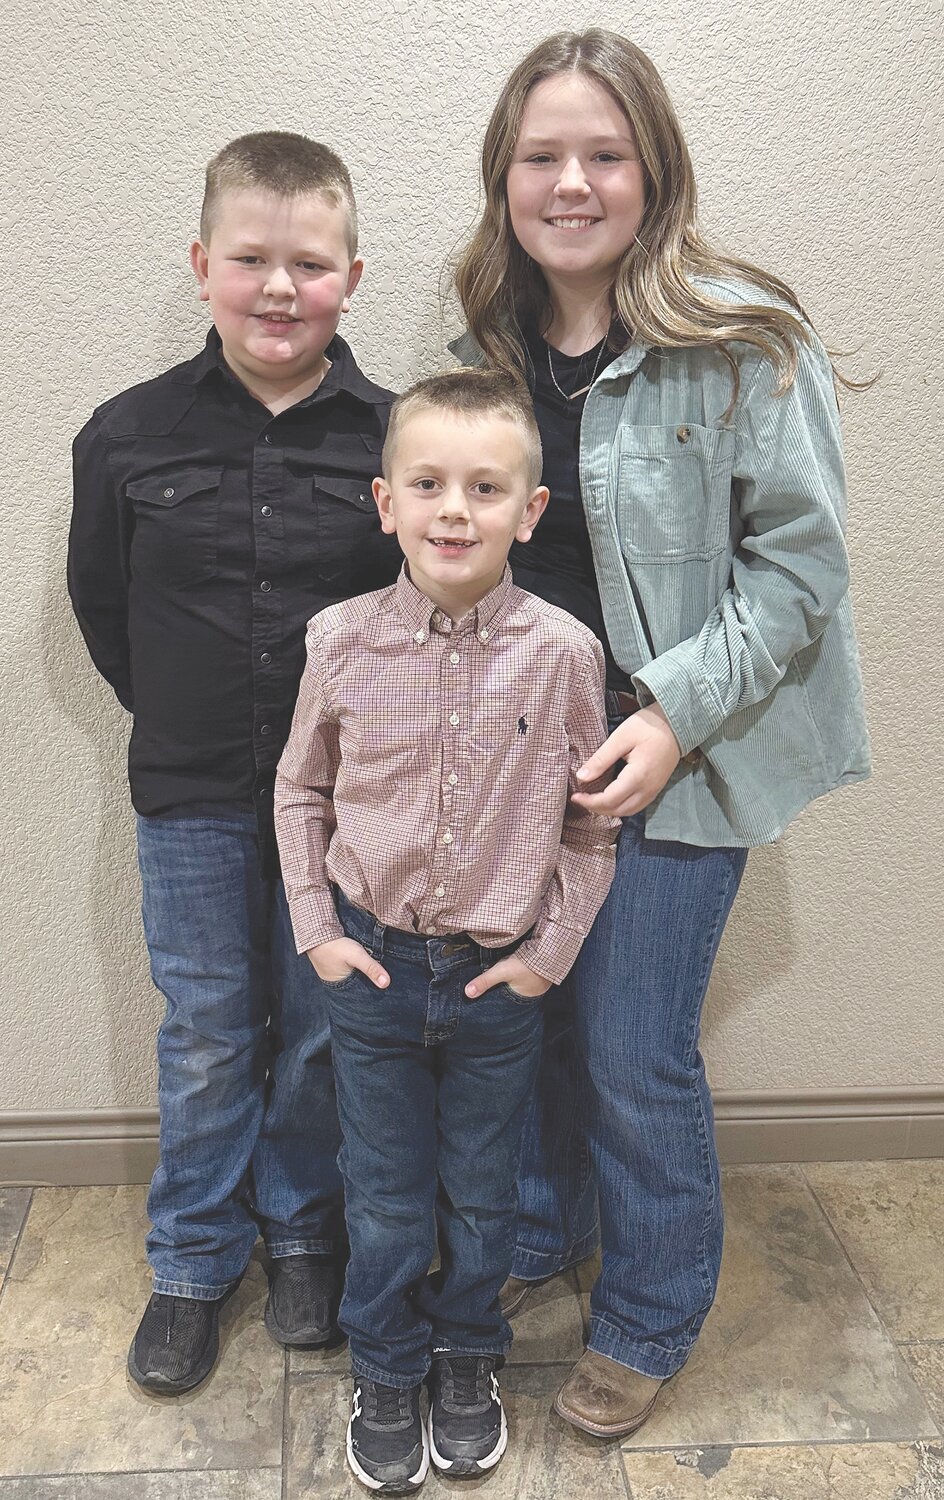 The children of Rodney and Alesha Thornton moved beyond their loss to participate in the Coryell County Youth Fair. From left to right, Jett Thornton, Judson Thornton, and Jaelee Thornton.